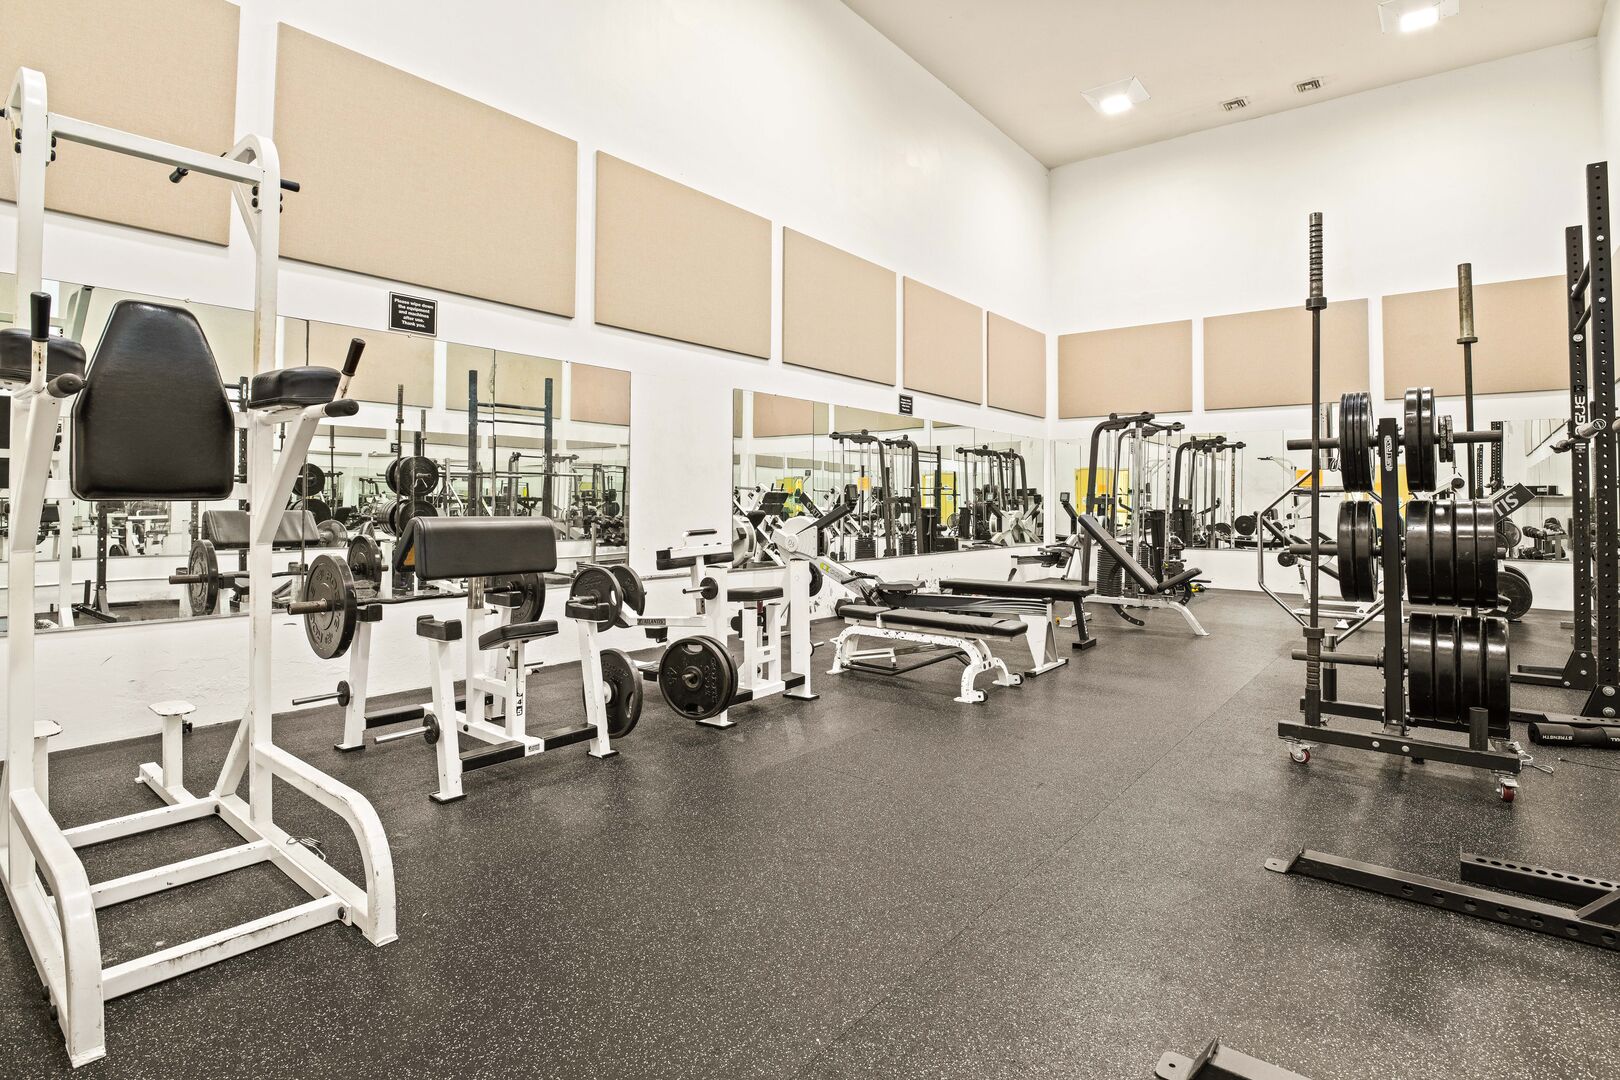 CL Sports Center Weights Room